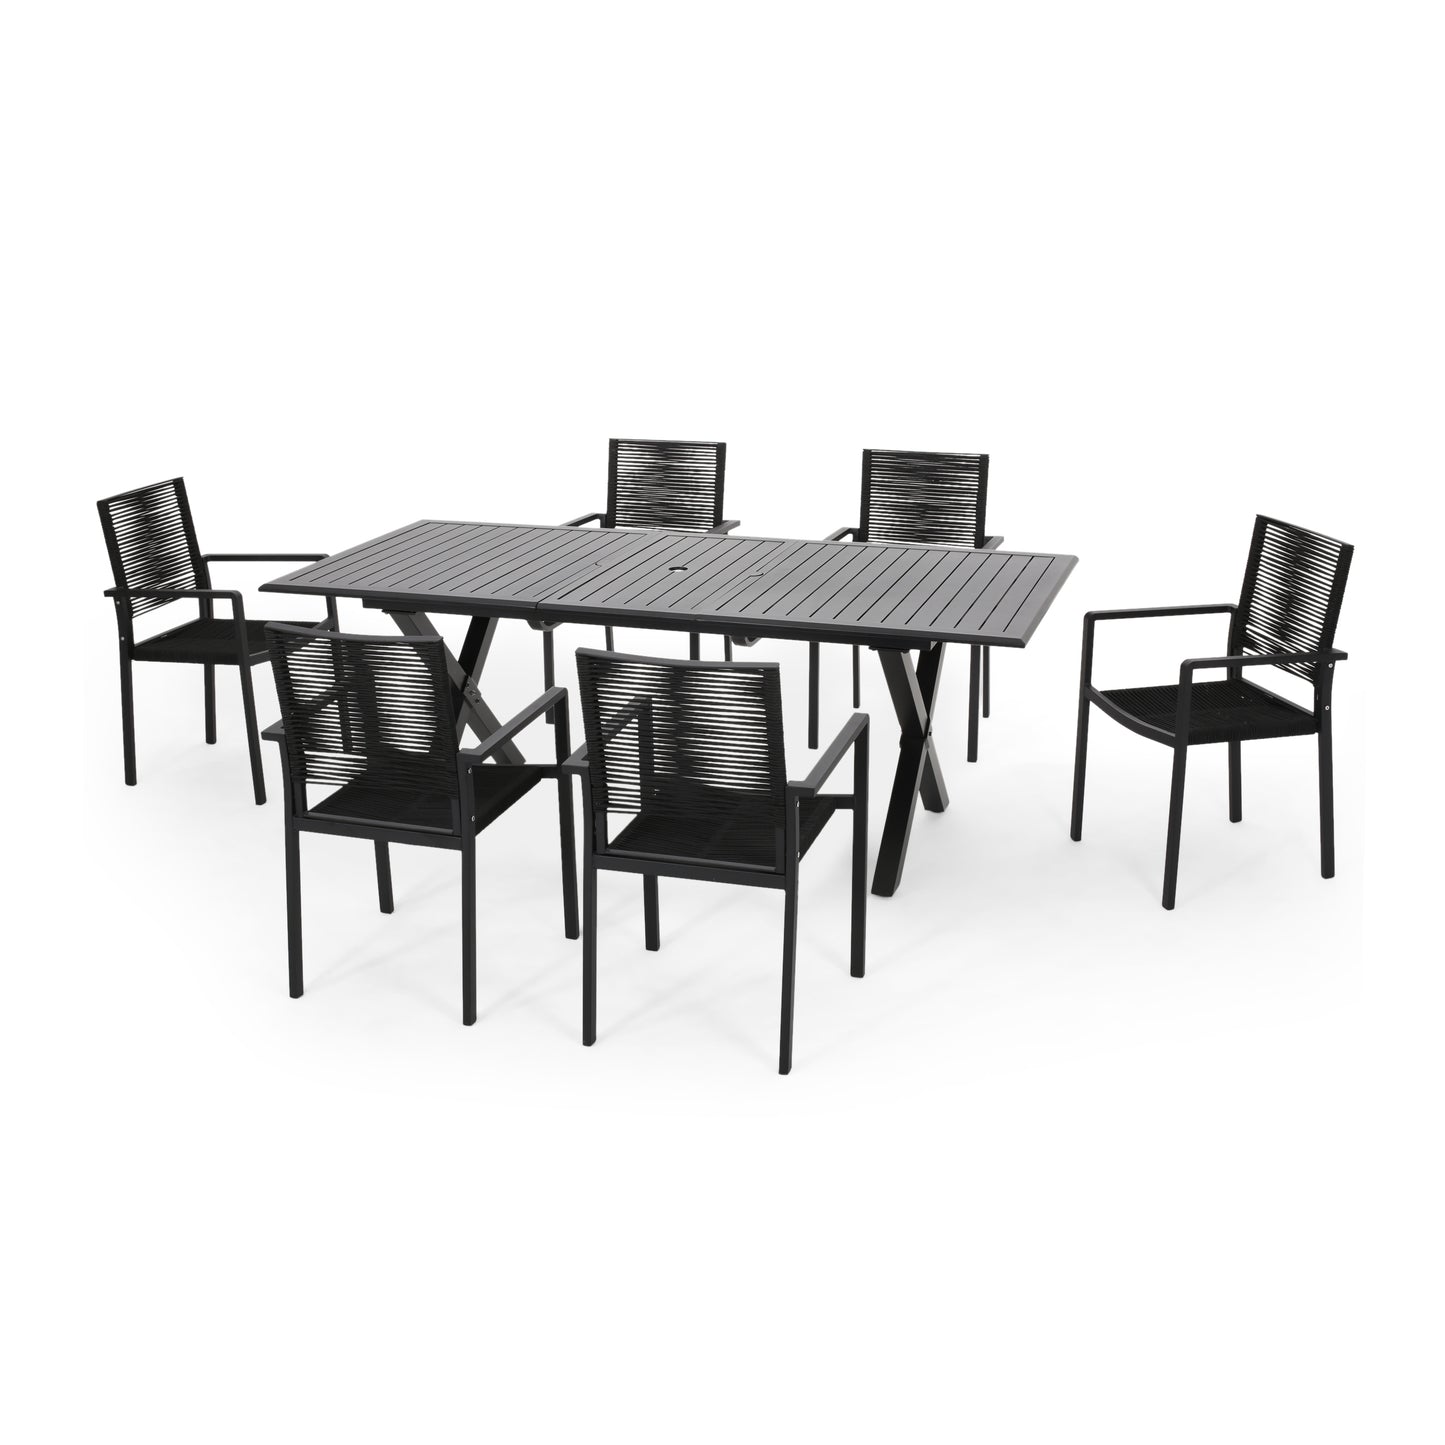 Layni Outdoor Modern 6 Seater Aluminum Dining Set with Expandable Table